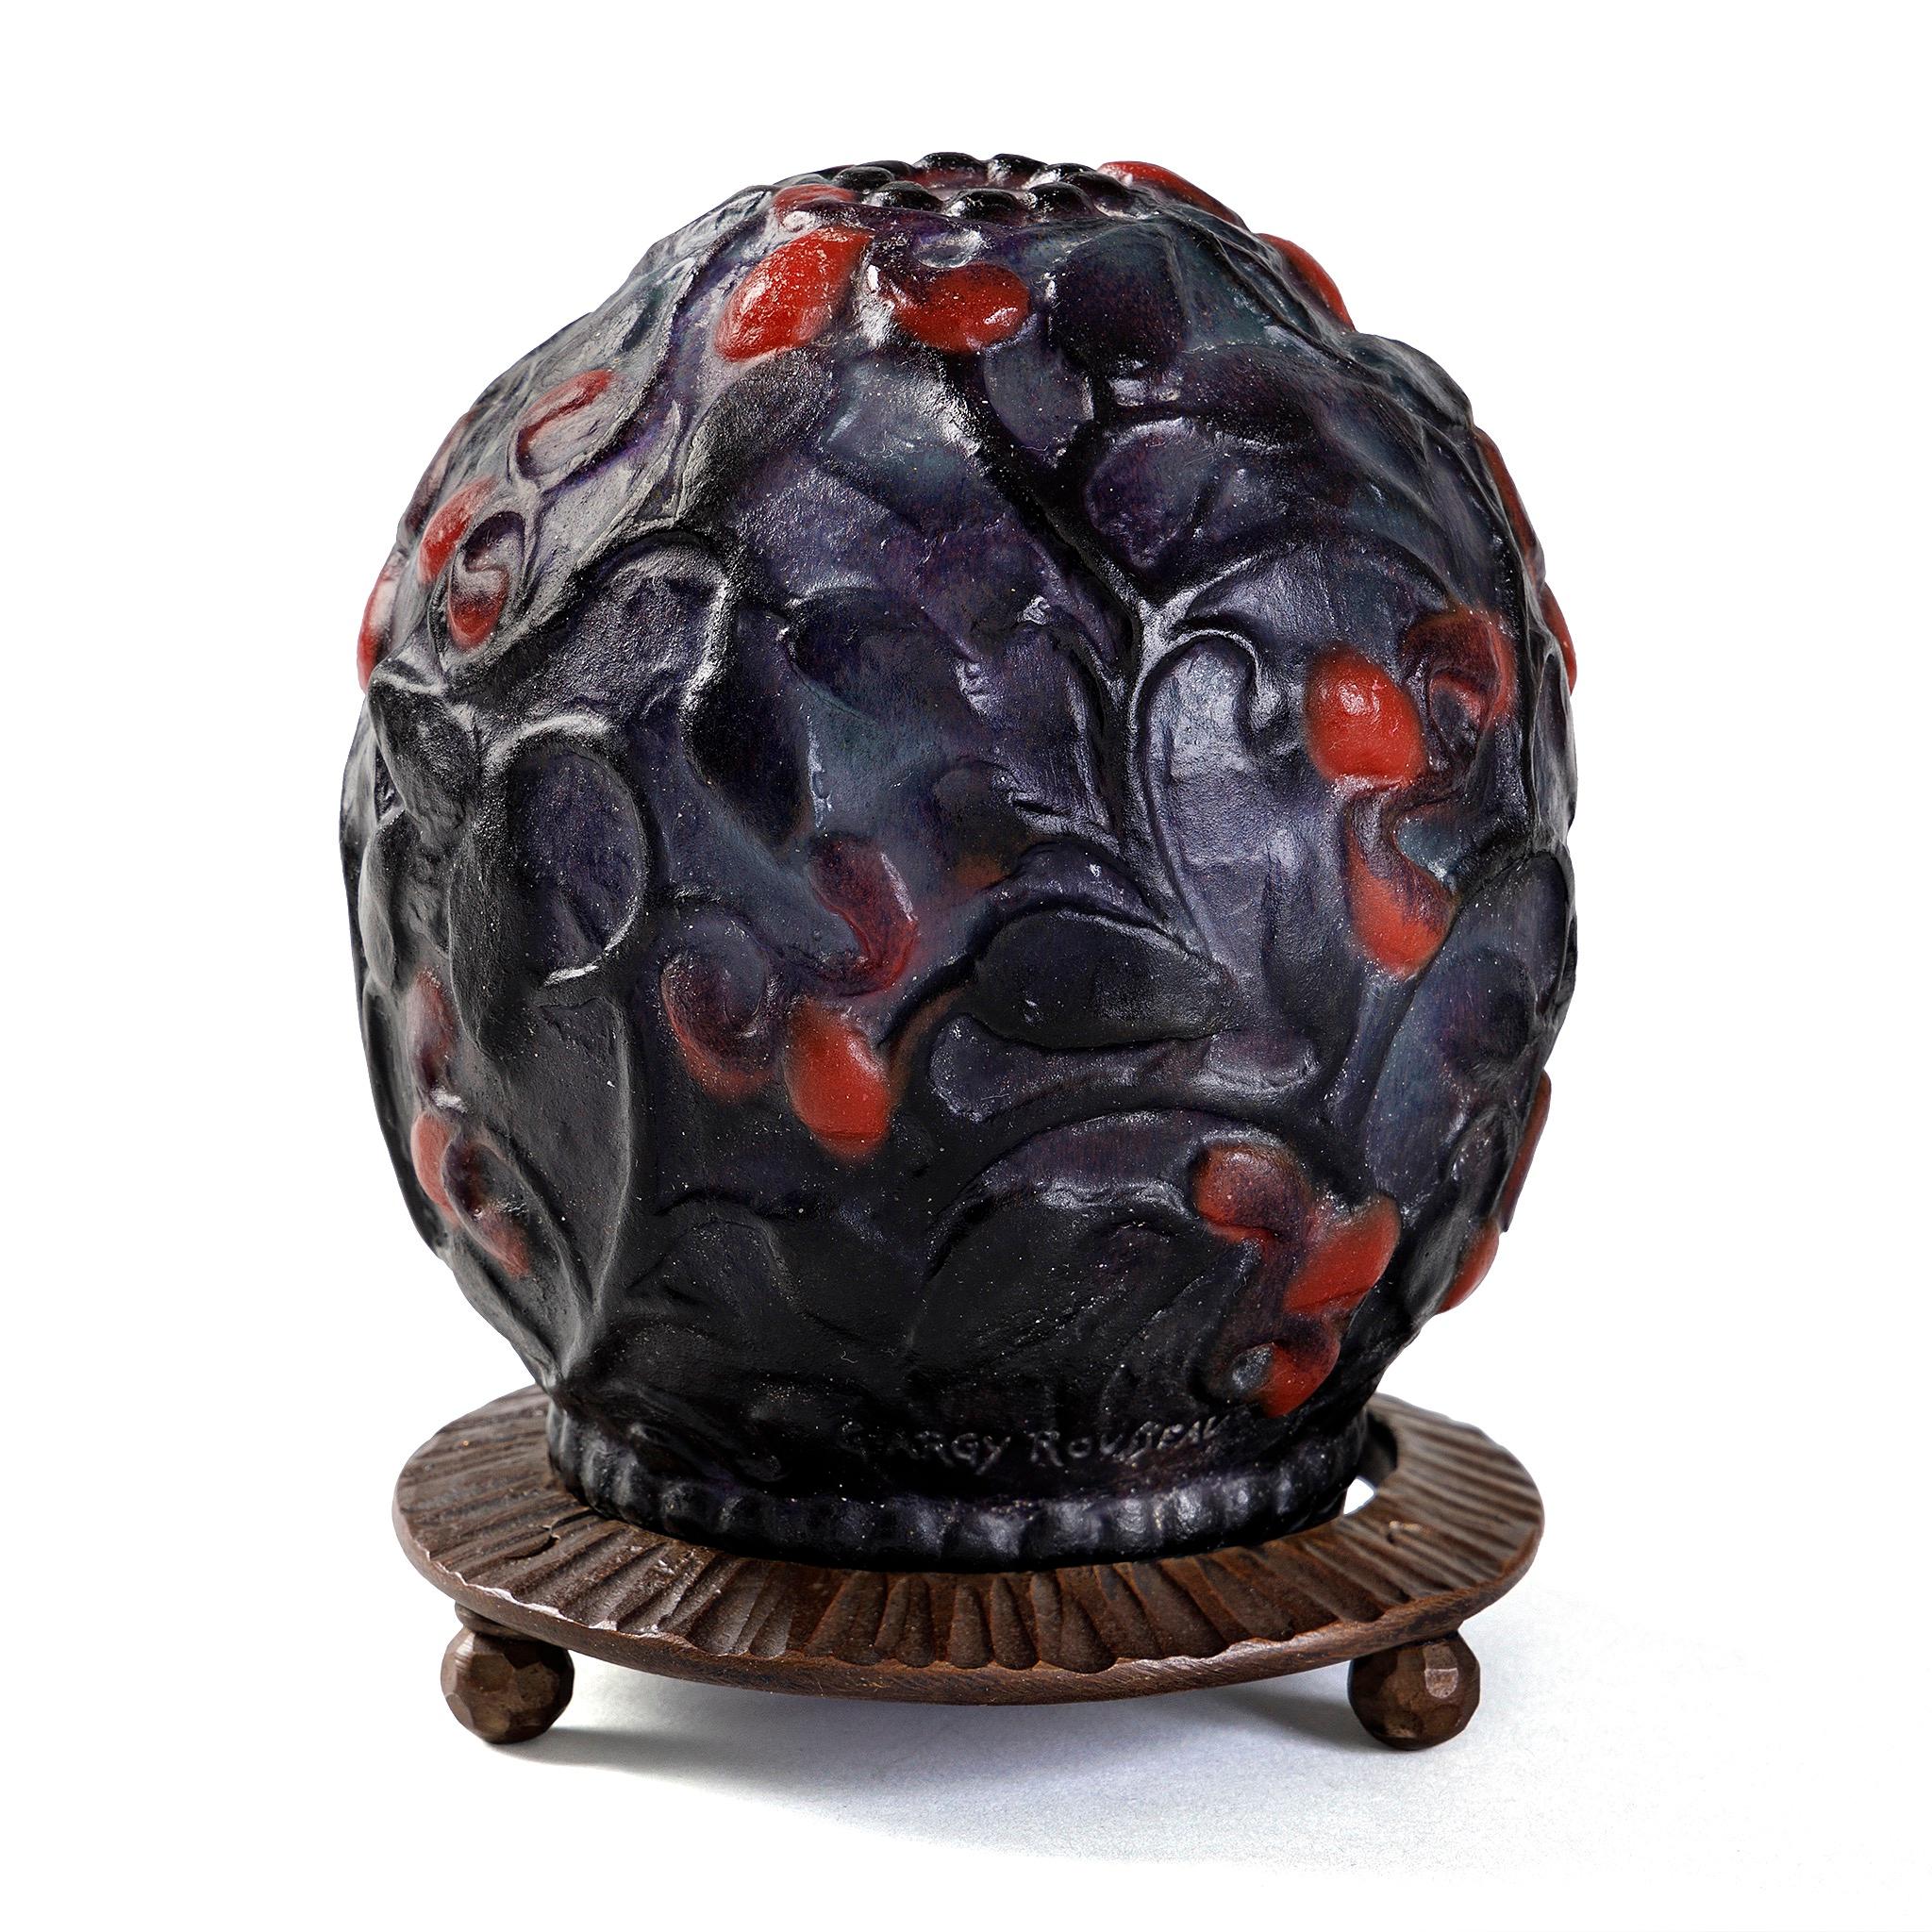 Argy-Rousseau's near-unique ability to gracefully soften the starkness of Art Deco design without ever sacrificing the strength of the design is on full display in this remarkable, petite masterpiece. Argy Rousseau's Fruits et Feuilles nightlight